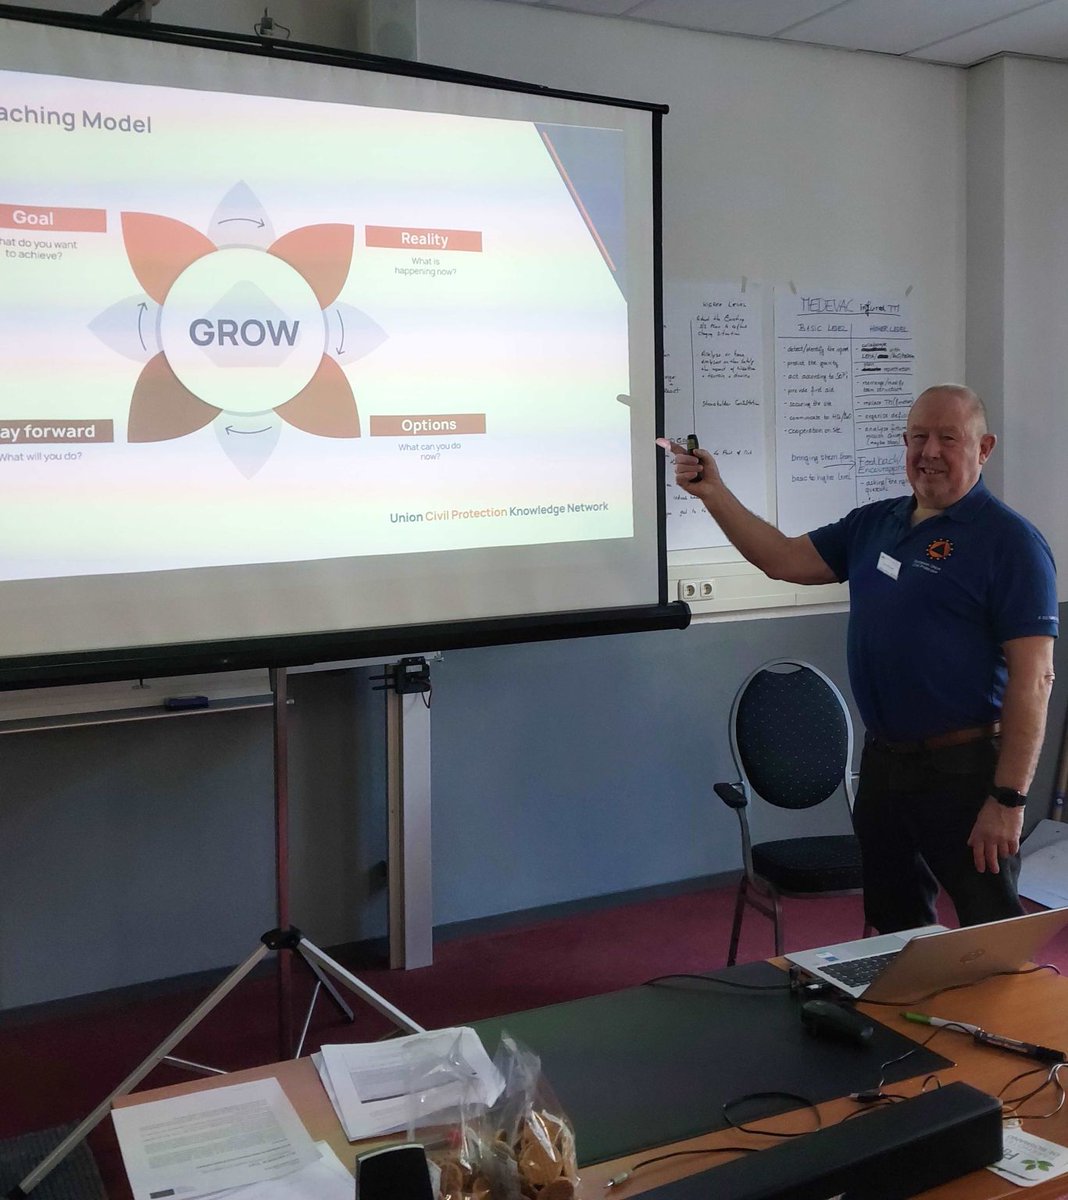 Coaching as a key element of EU MODEX, especially EUCPT-TAST: at the 'Training of Trainers Workshop'  the GROW model was presented. This model is the choice for all EU MODEX trainer teams. The GROW model sequence illustrates the solution focus of coaching. #EUMODEX #EUCivPro